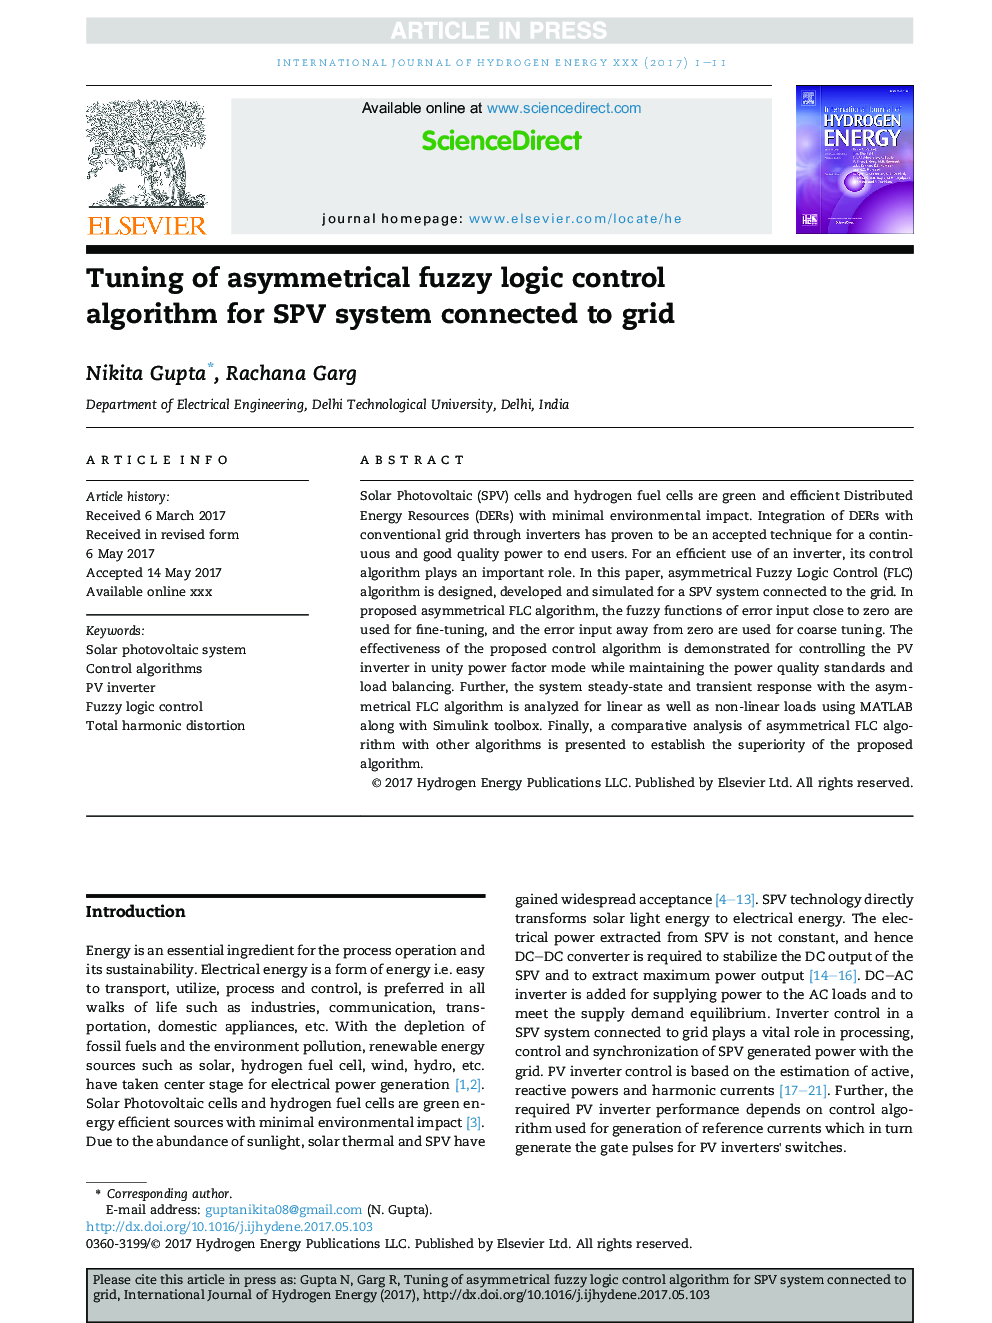 Tuning of asymmetrical fuzzy logic control algorithm for SPV system connected to grid